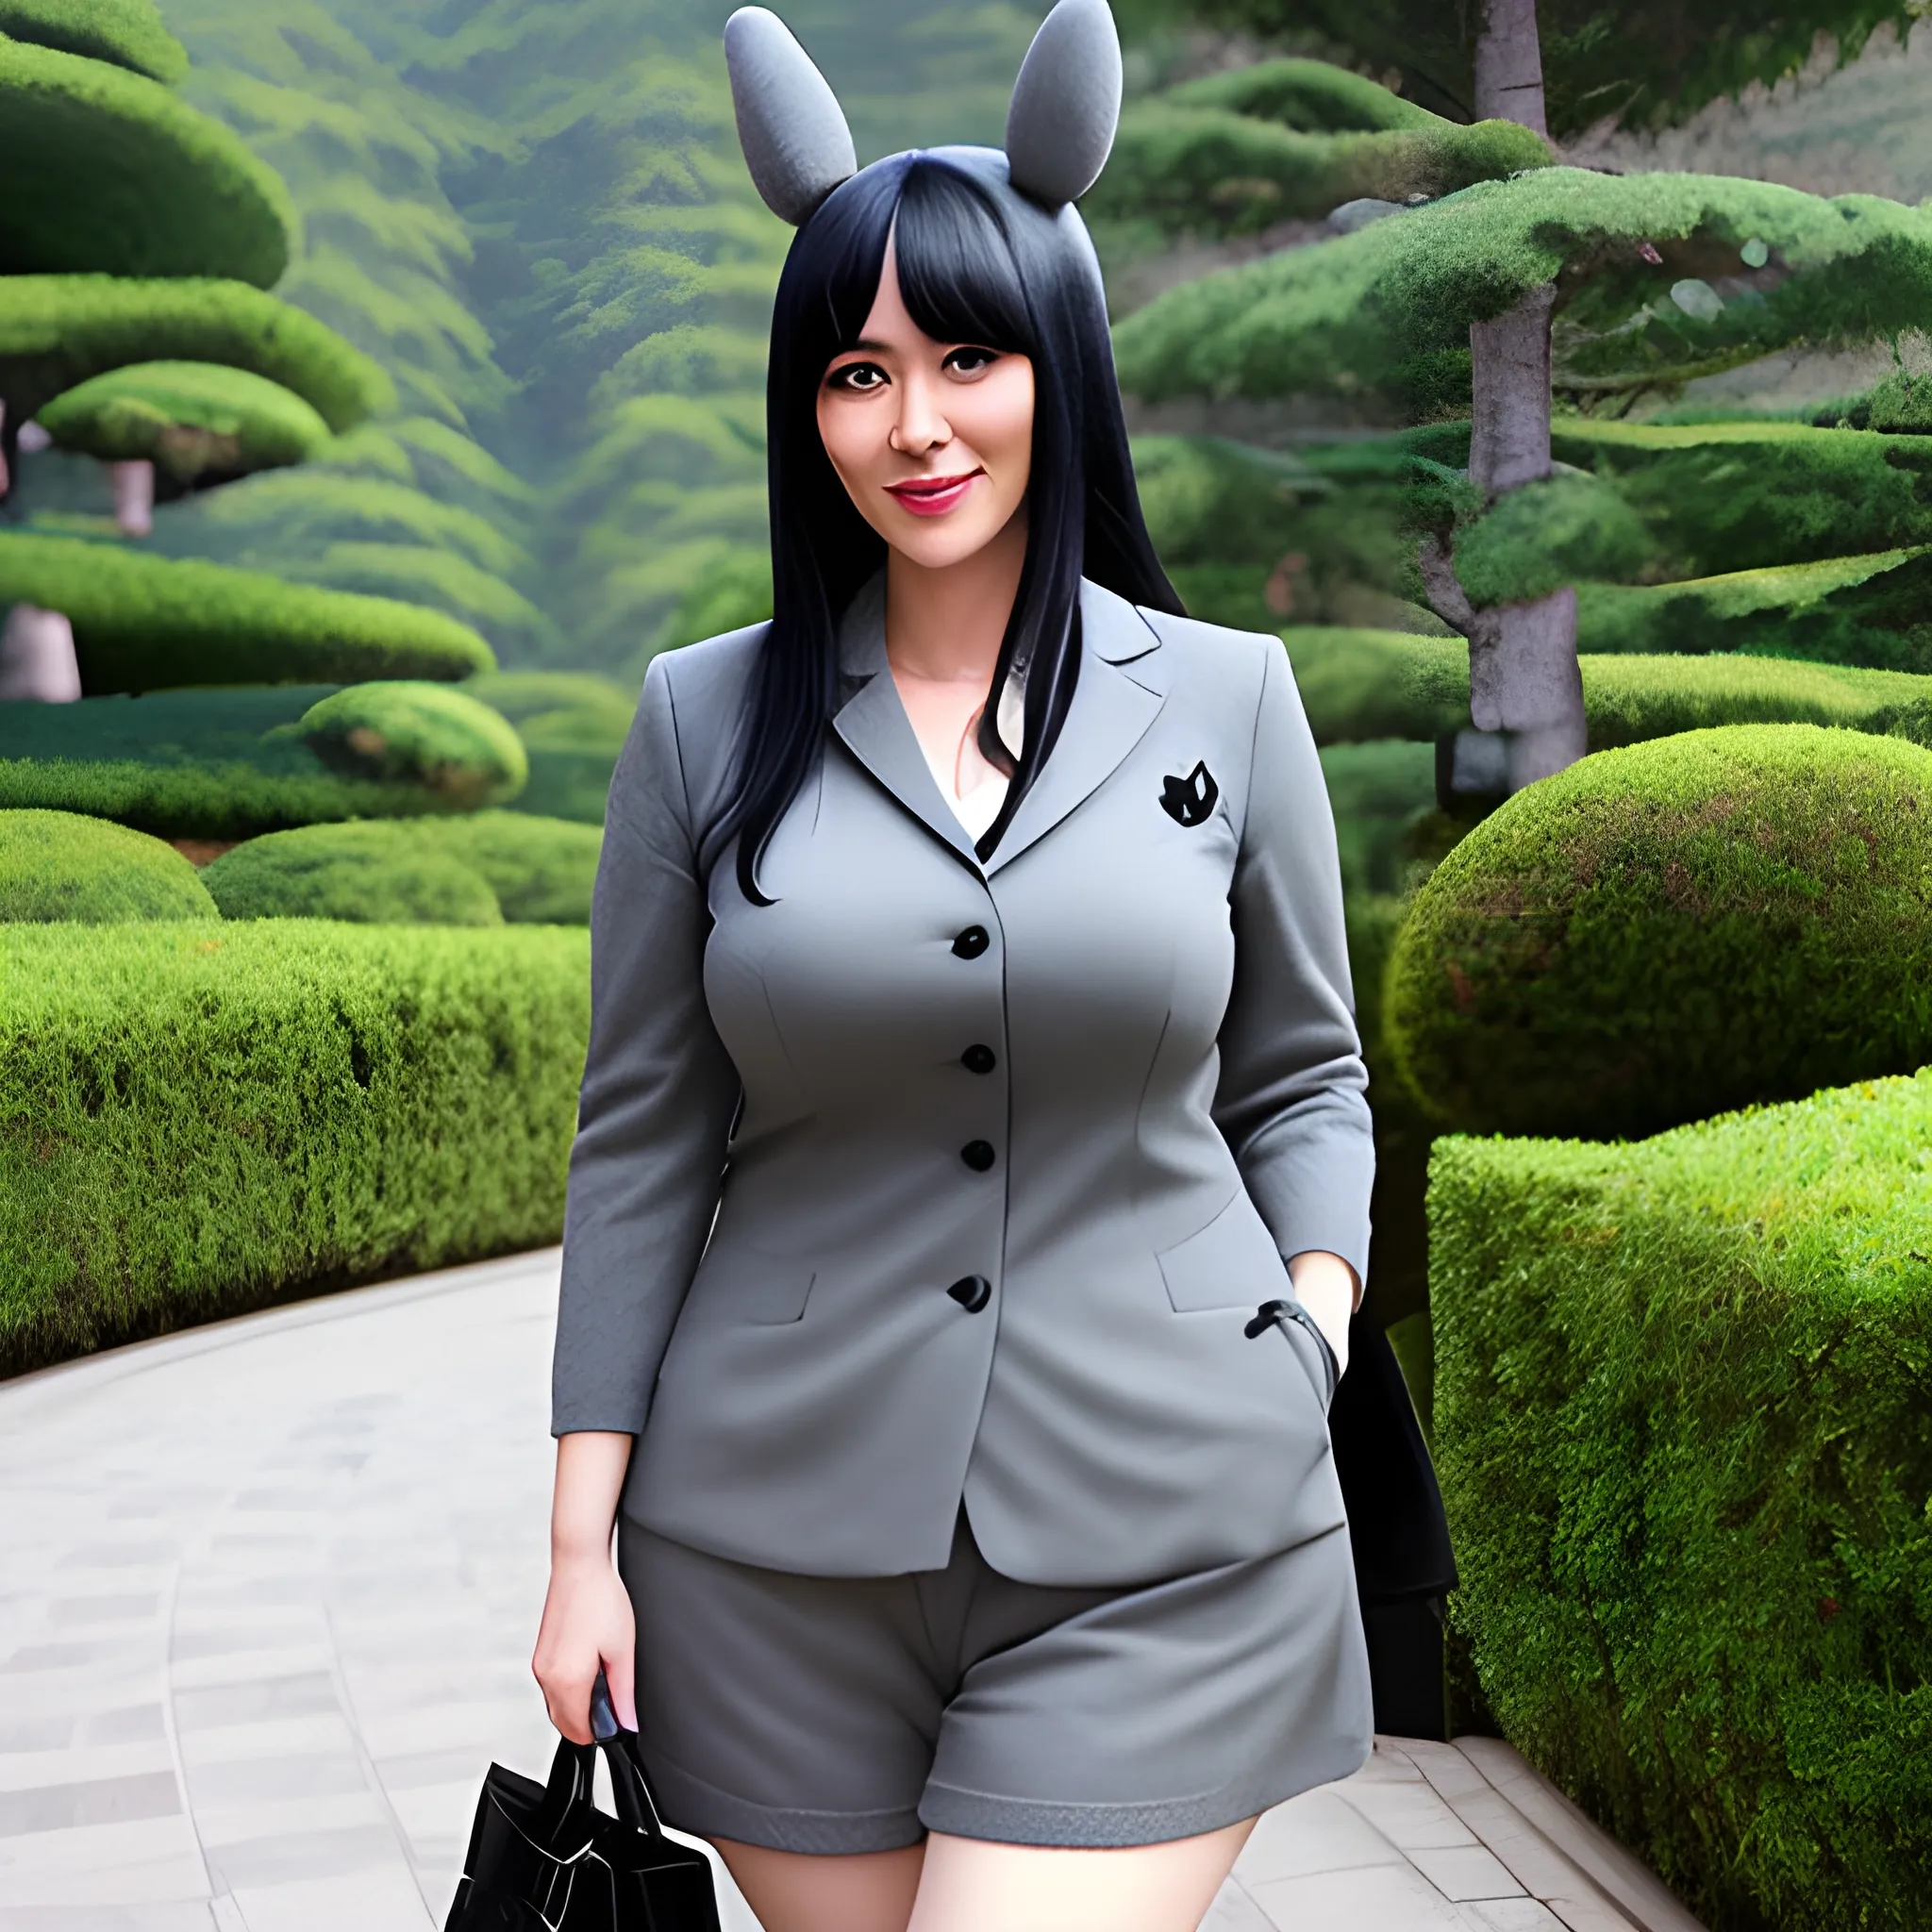 Teenage Girl, thin and with black hair wearing a gray totoro suit